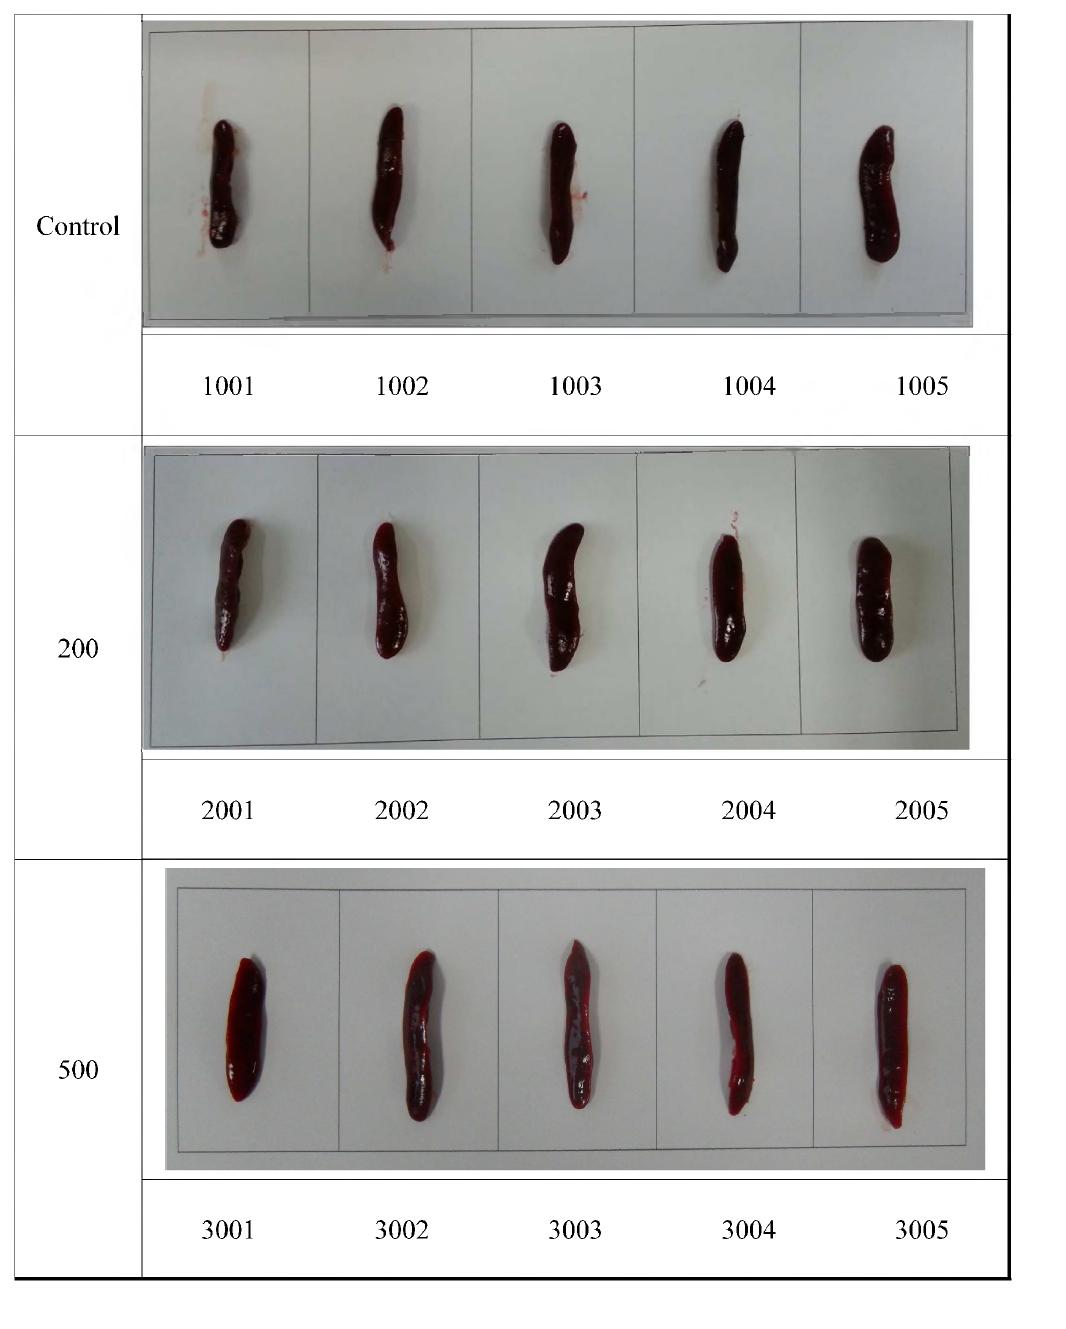 Appearance of spleen in rats treated orally extracts from Hippophae rhamnoides